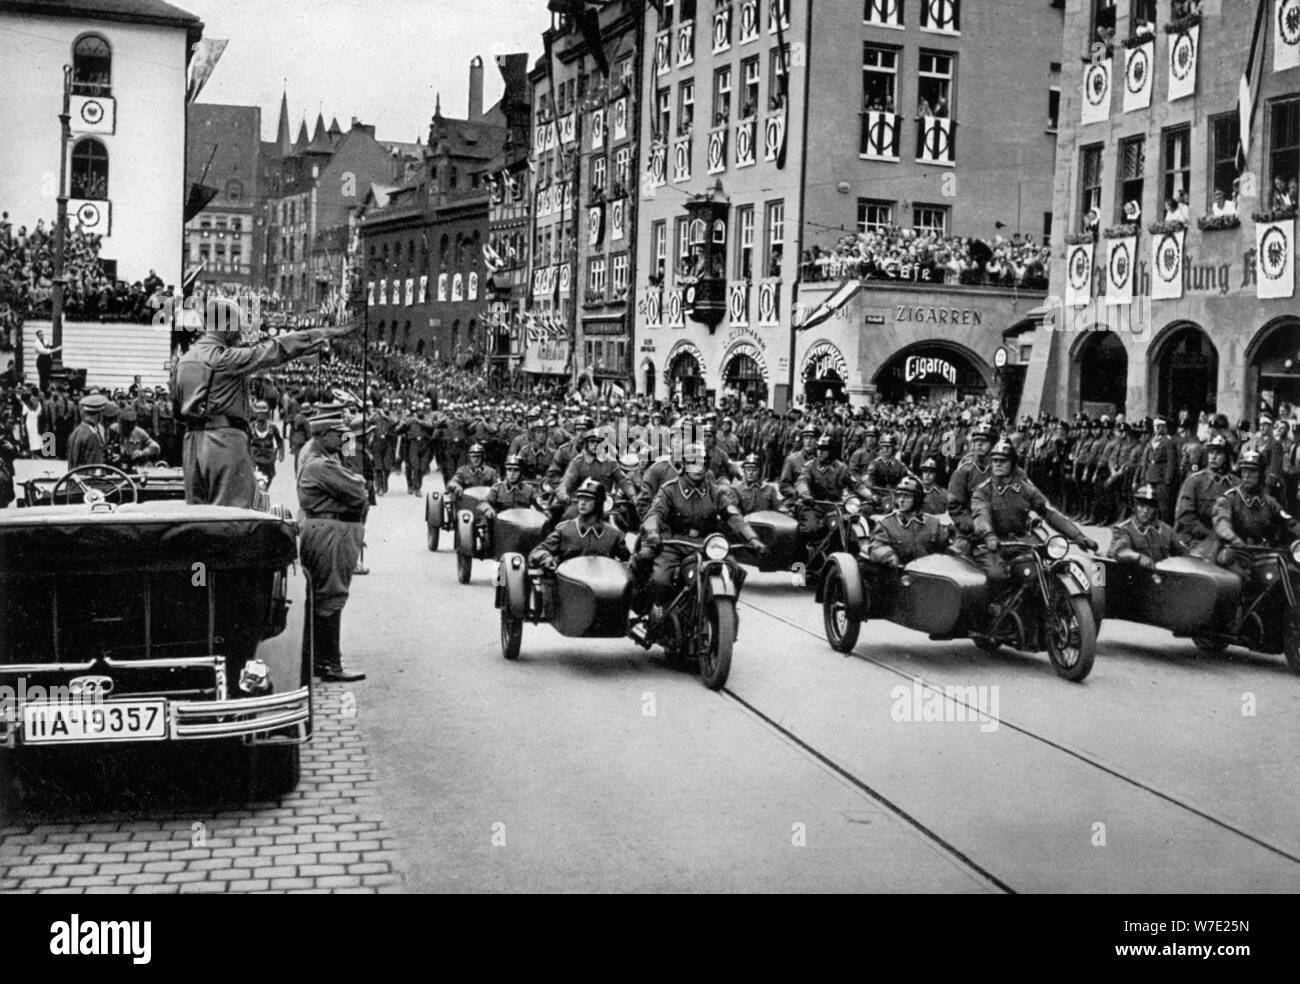 Adolf Hitler reviewing motorcycle troops at the Nuremberg Rally, Germany, 1935. Artist: Unknown Stock Photo